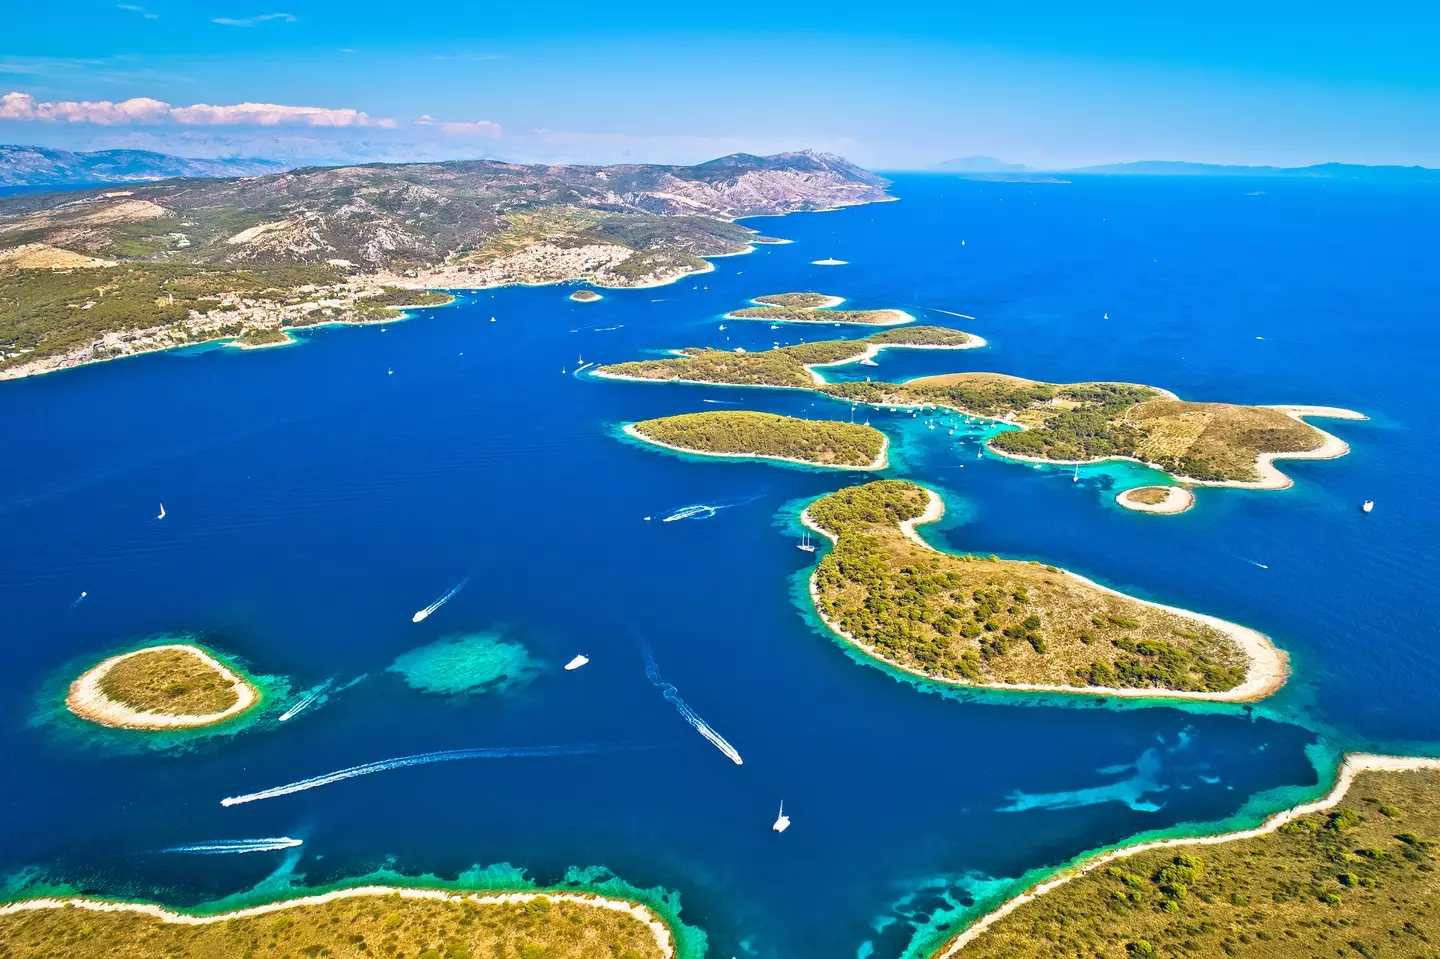 Croatia shouldn't be overlooked as a holiday destination by Brits.